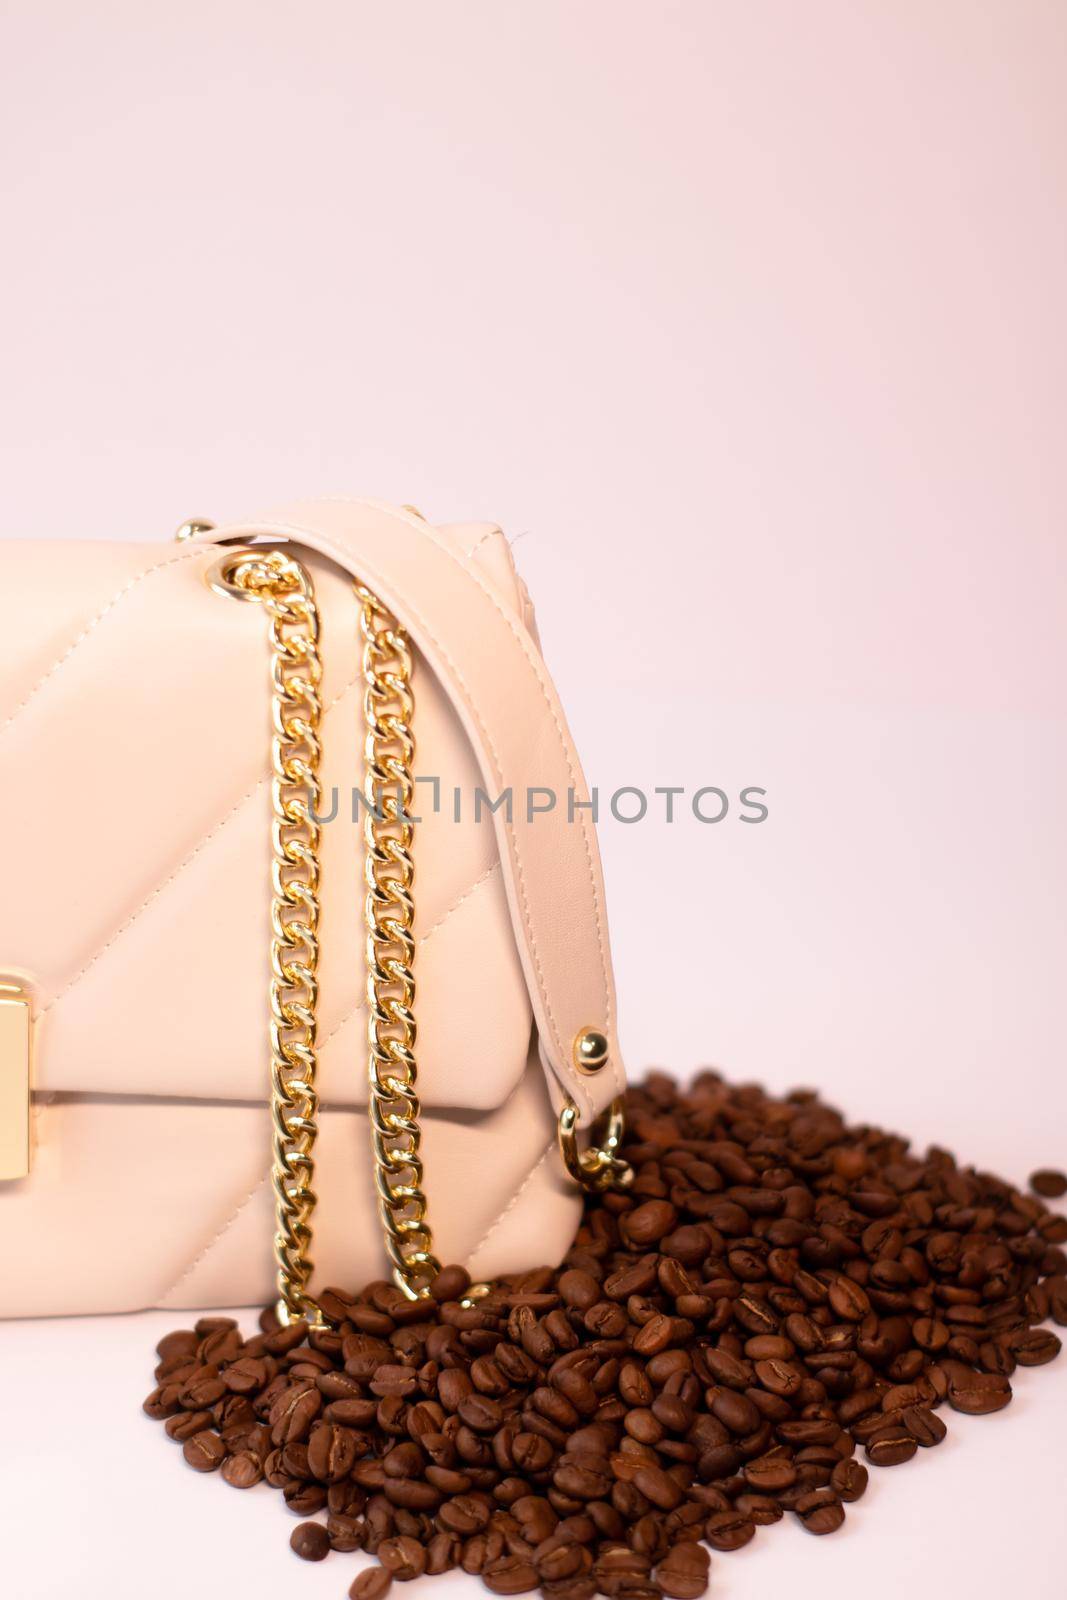 fashion beige leather woman handbag with gold chain with coffee beans nearby isolated on white background. Product photography. bags and purses for women by oliavesna